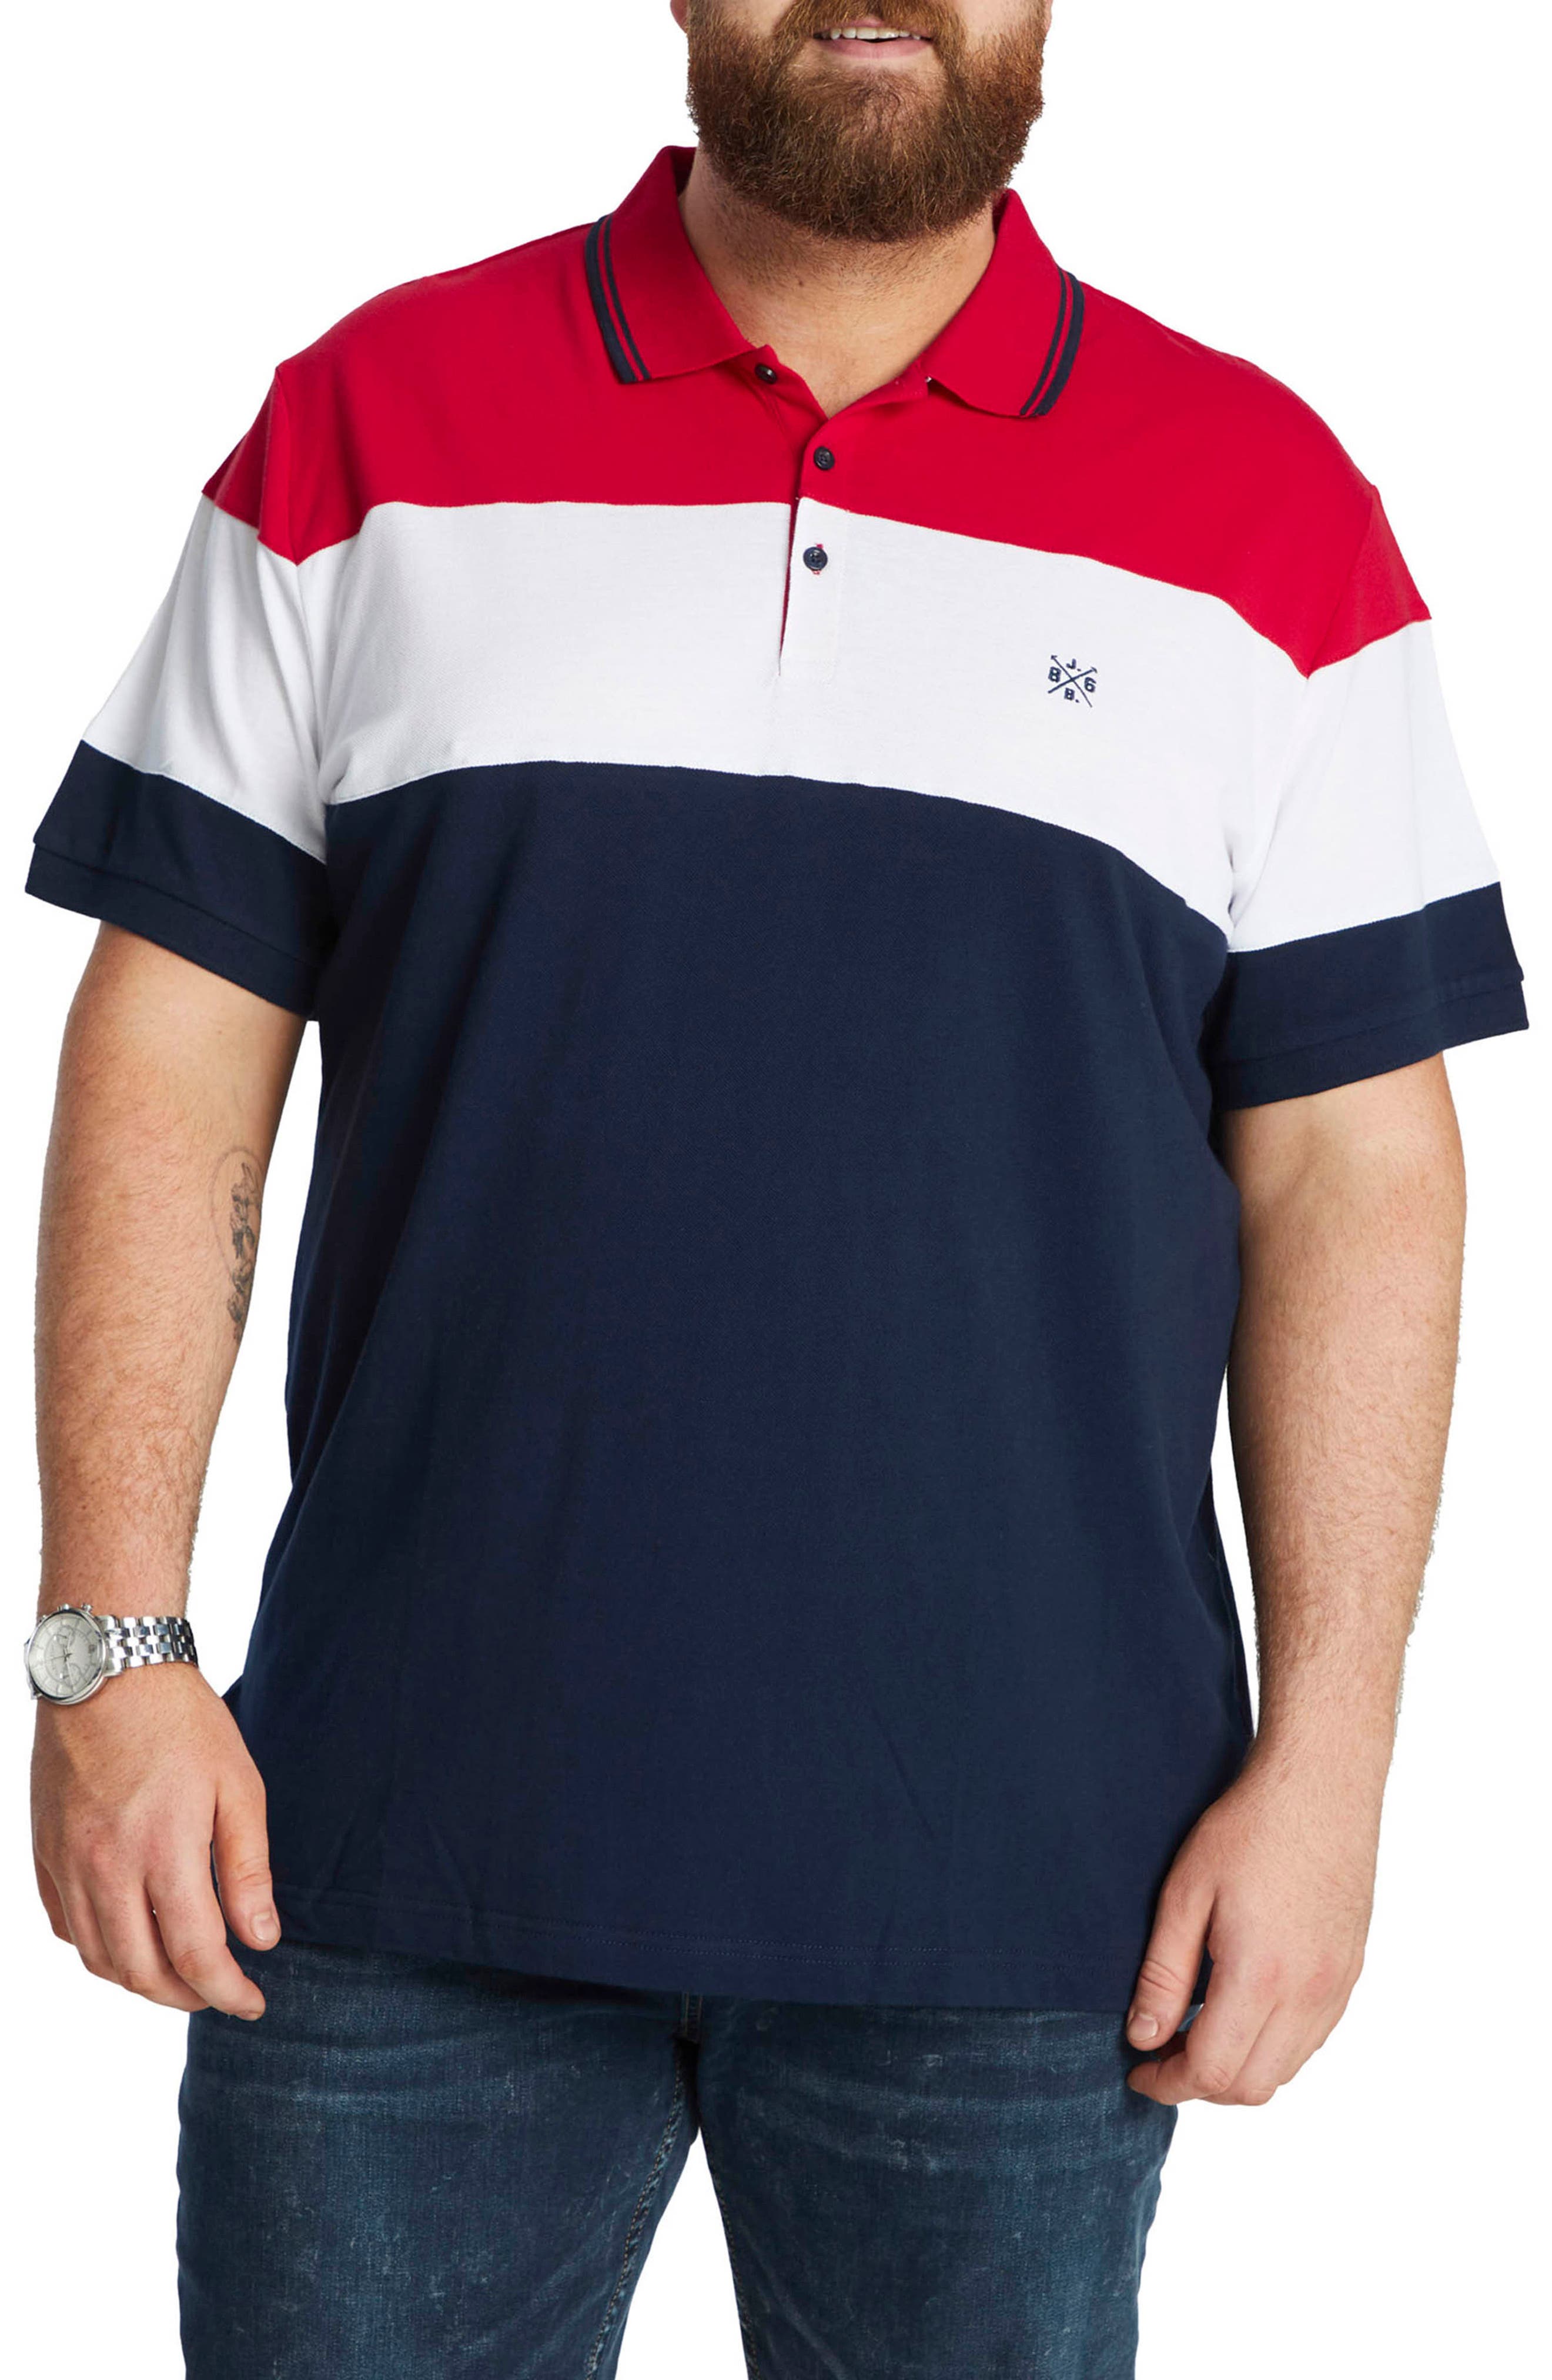 Johnny Bigg Dangerfield Colorblock Polo in Red